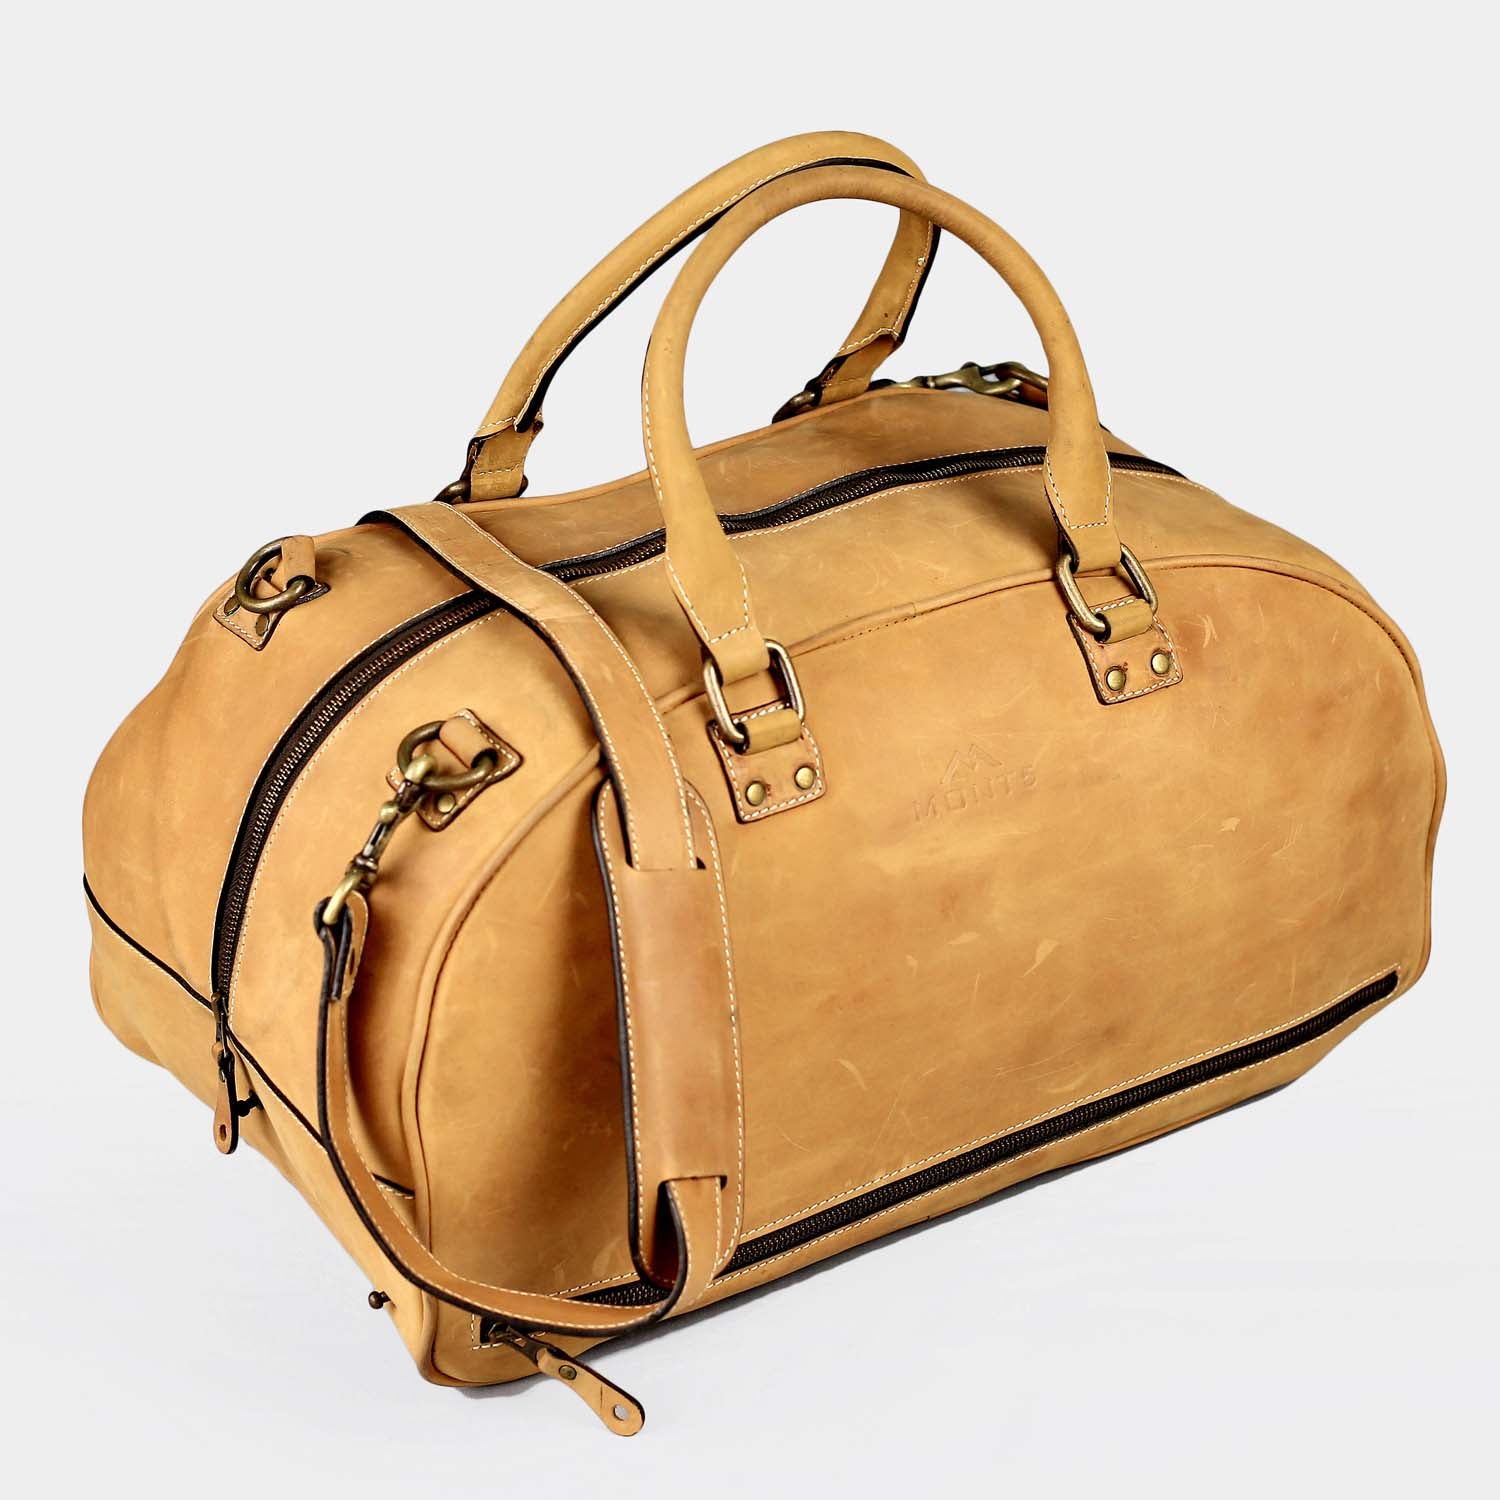 Small Duffle Bag | Carry On Leather Luggage | MONT5